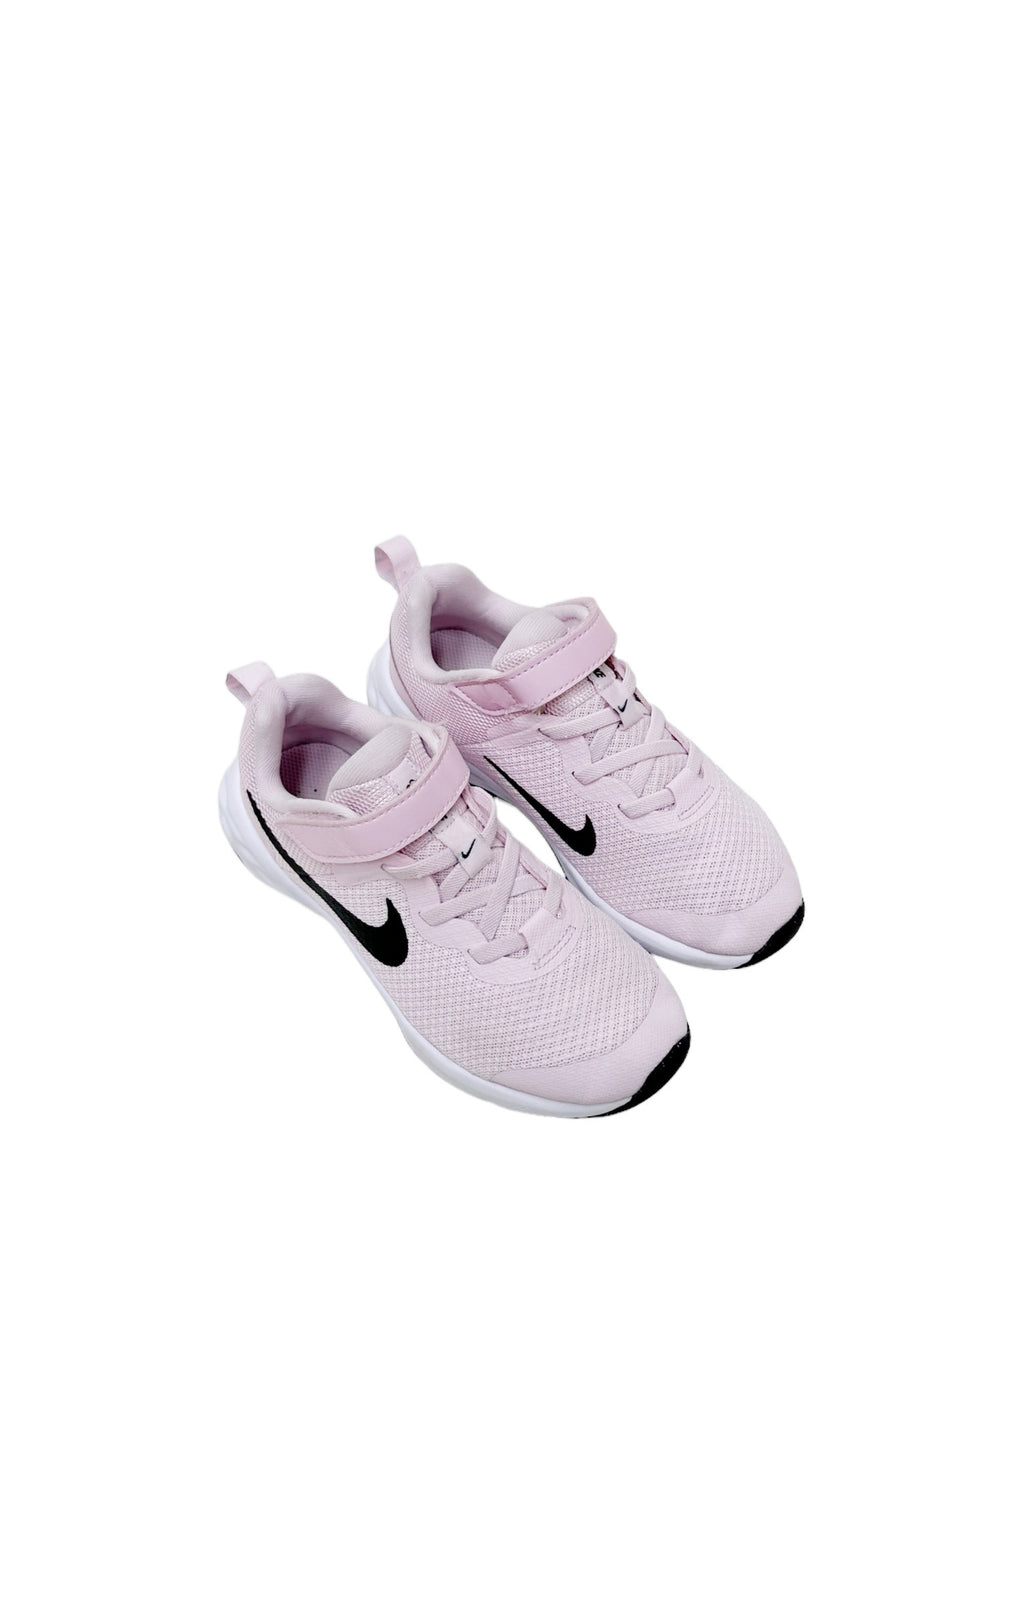 NIKE Sneakers Size: Toddler US 13.5C